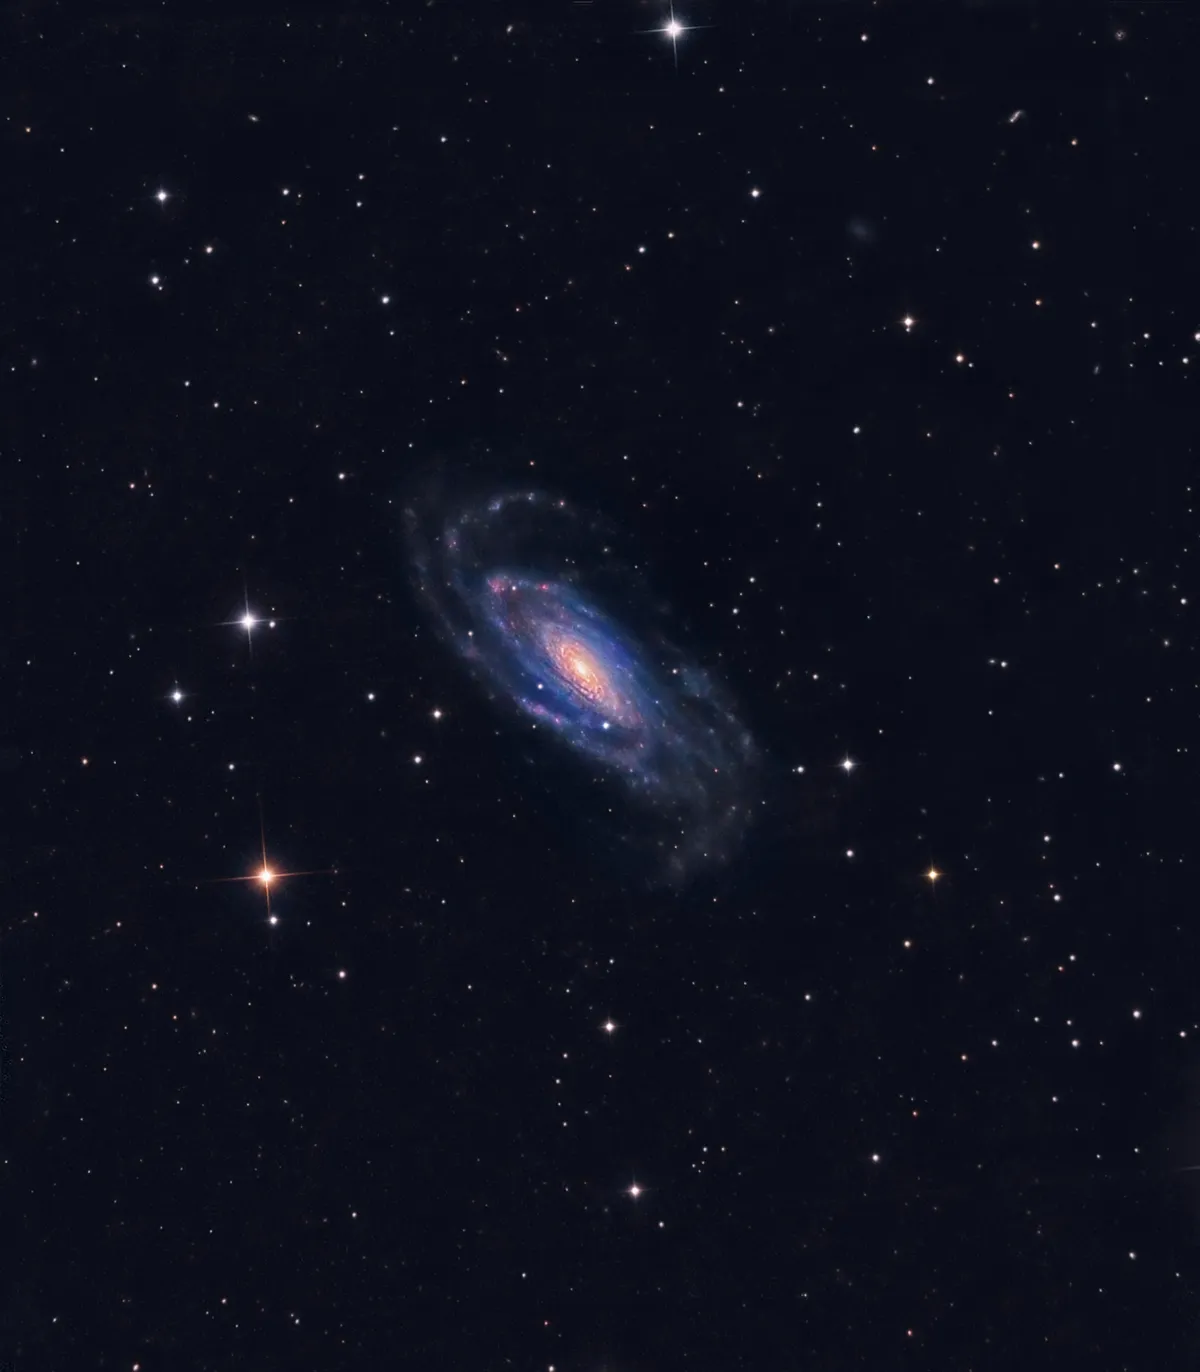 Spiral galaxy NGC 5033 in Canes Venatici Tony Funnell, Worthing, Sussex, 12 and 14 April 2020. Equipment: QSI 683 mono camera, 12” Ritchey-Chrétien telescope, Mesu 200 mount